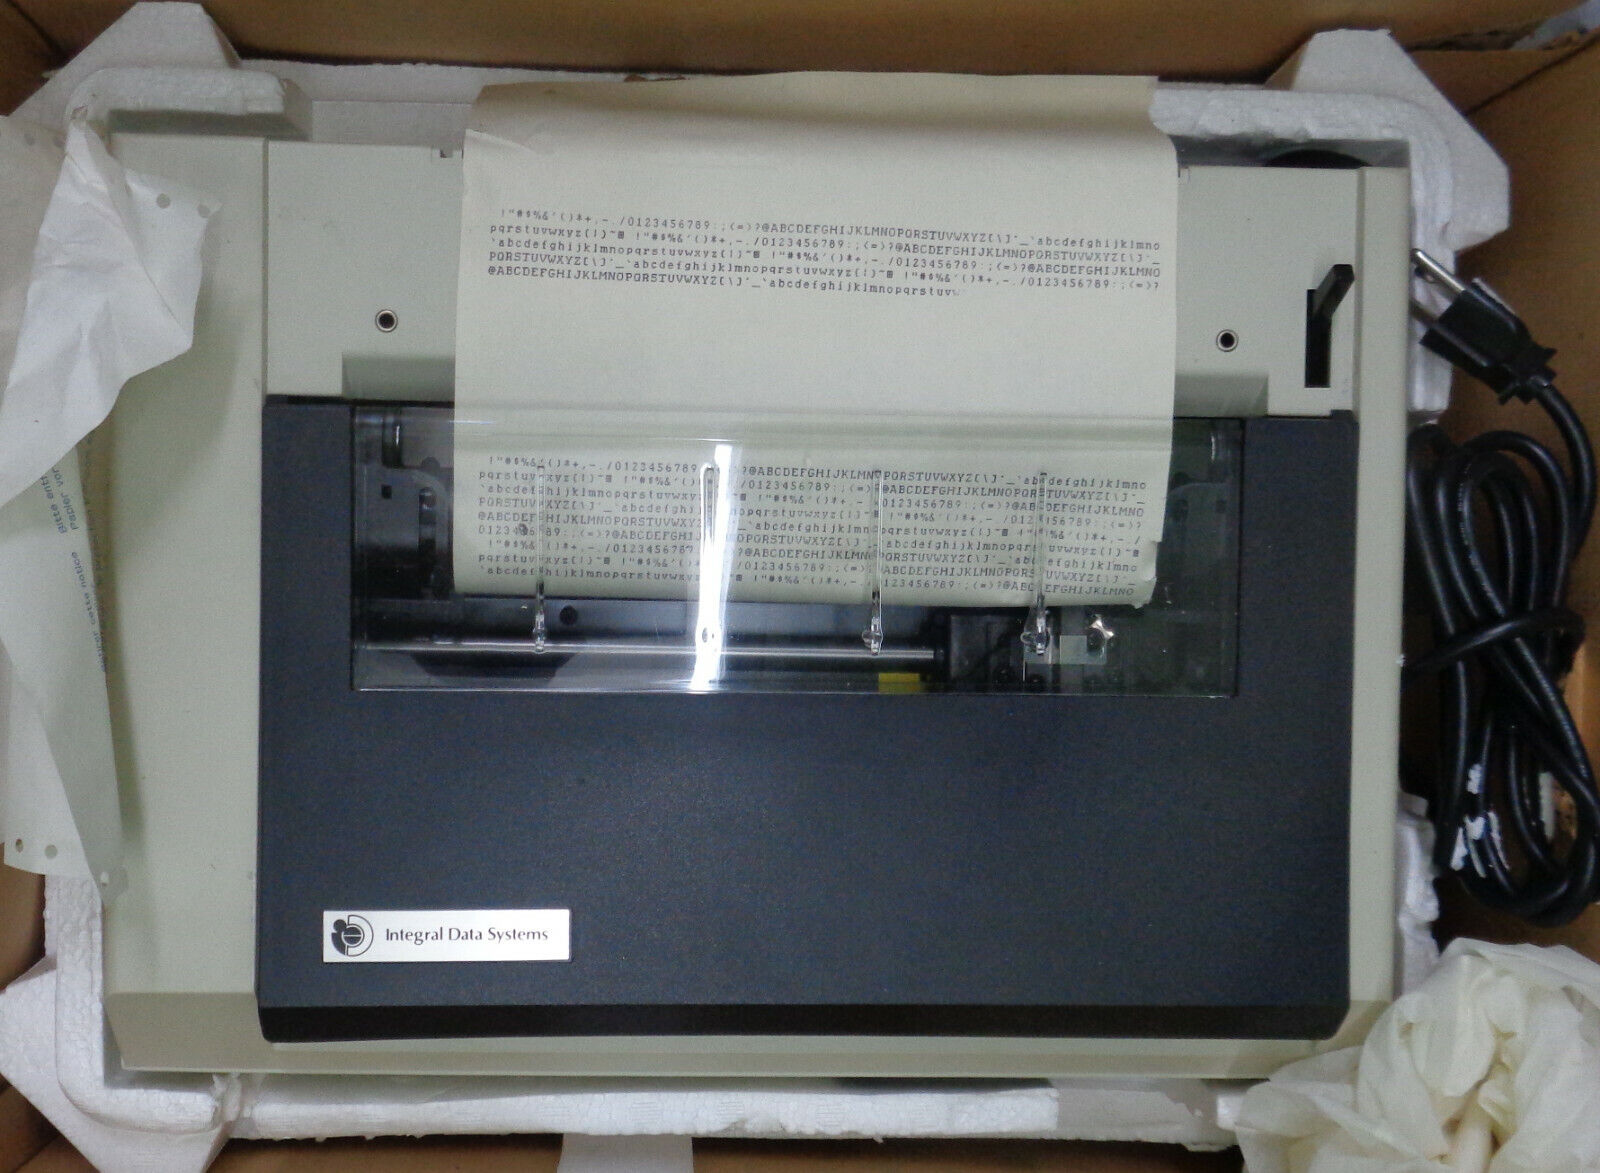 Microprism Printer IDS Model 480, by Integral Data Systems